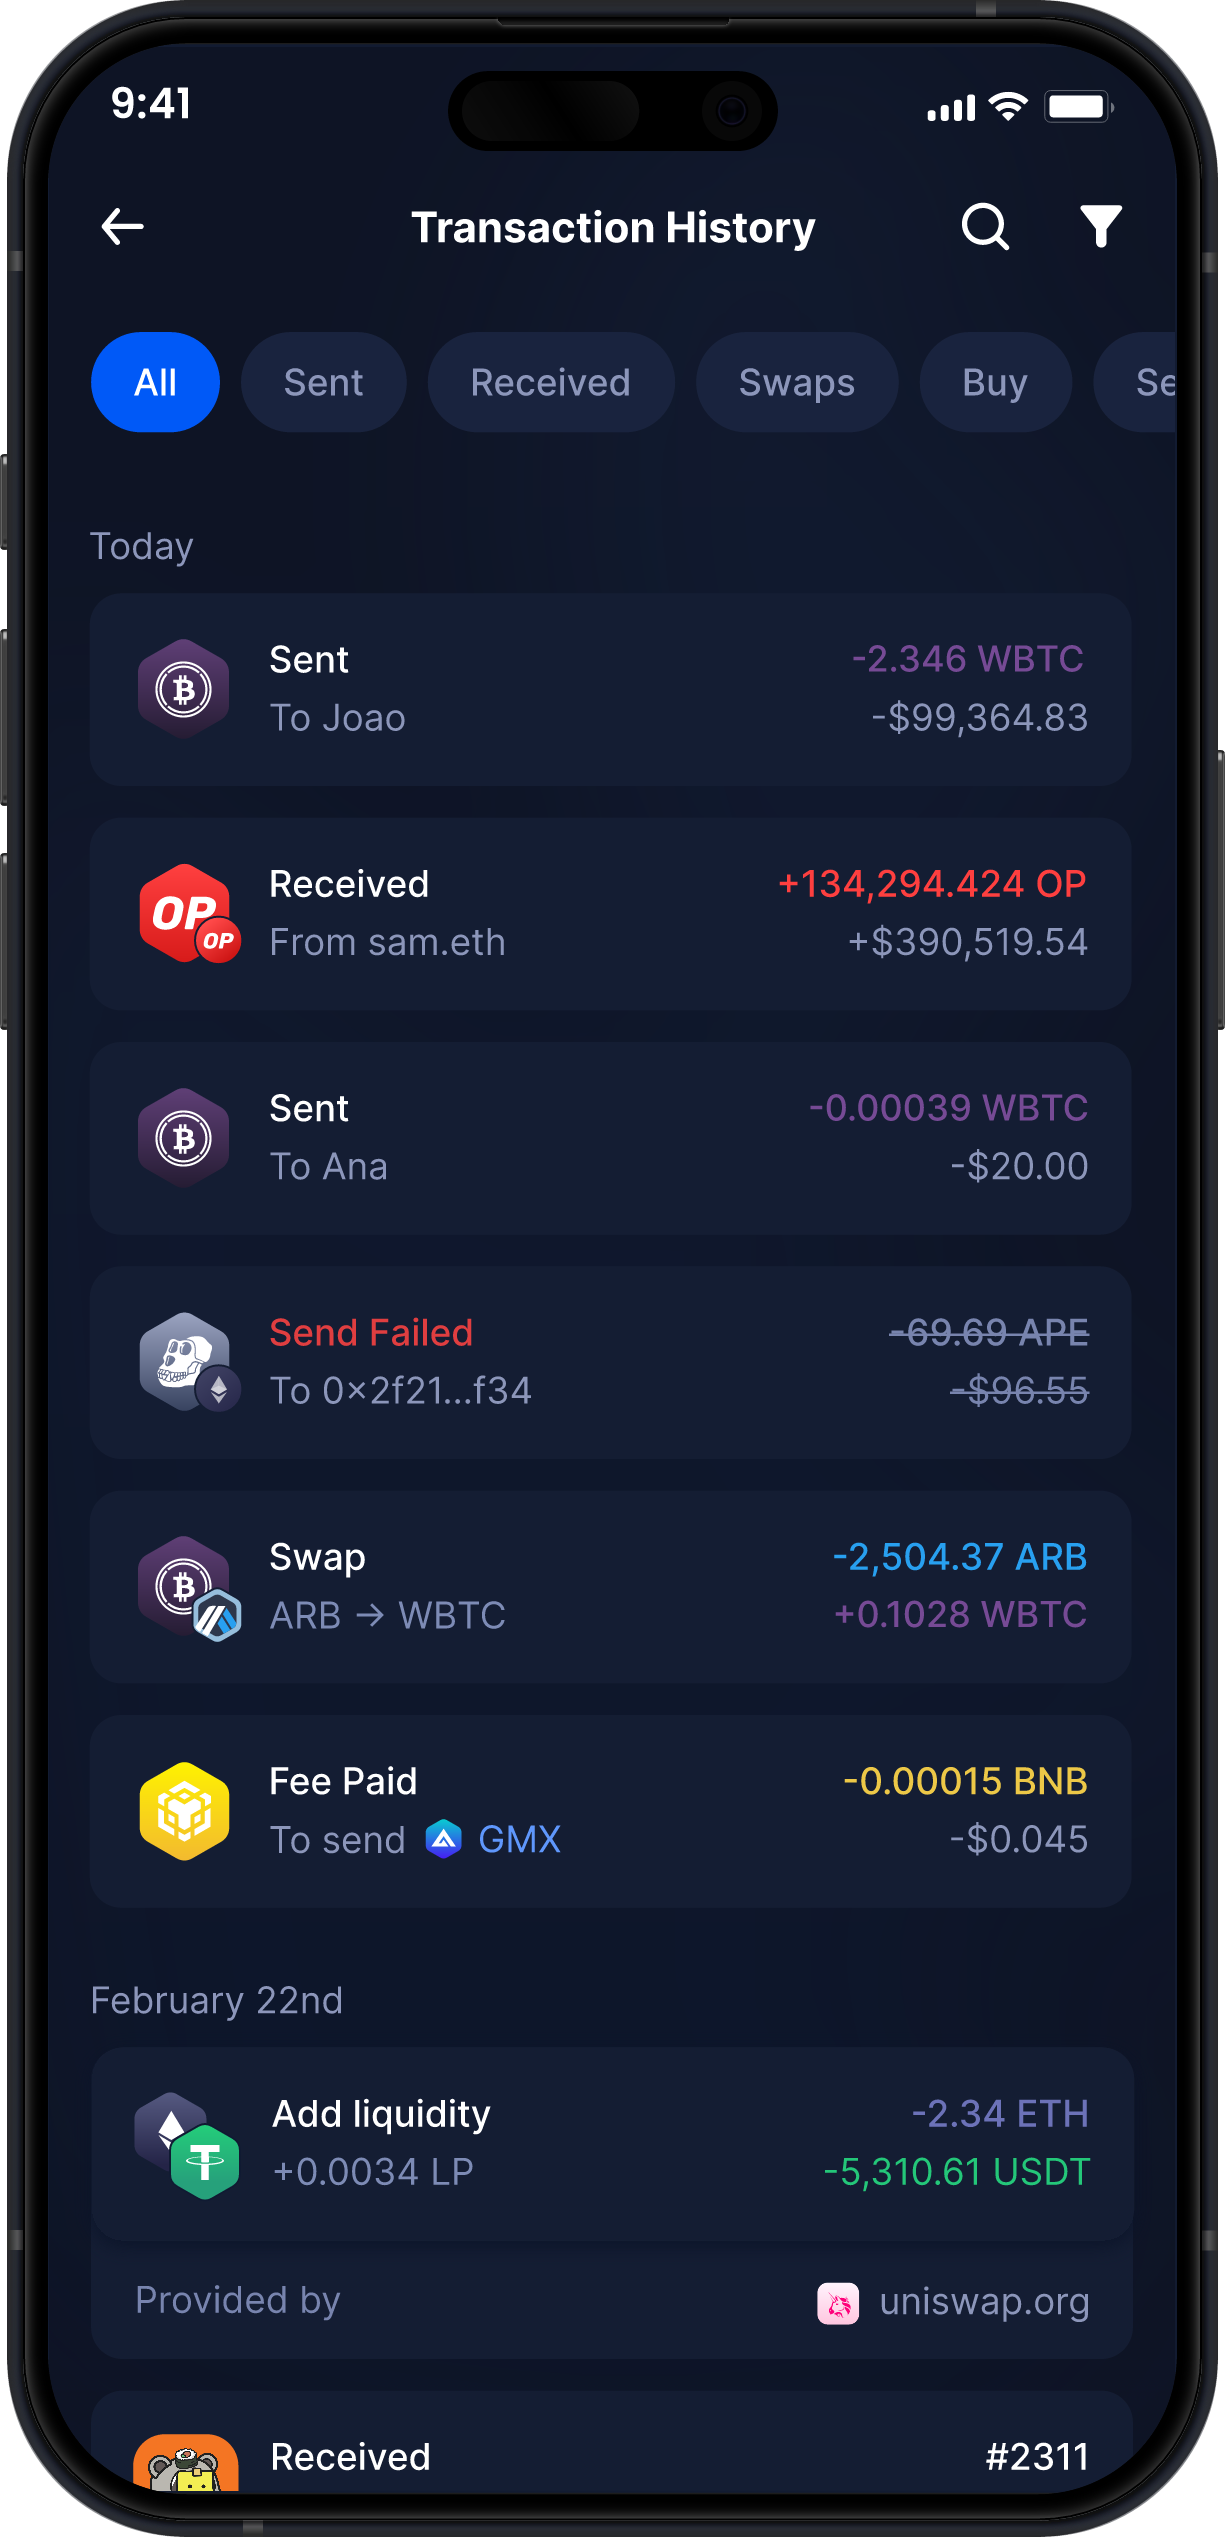 Infinity Mobile Wrapped Bitcoin Wallet - Complete WBTC Transaction History